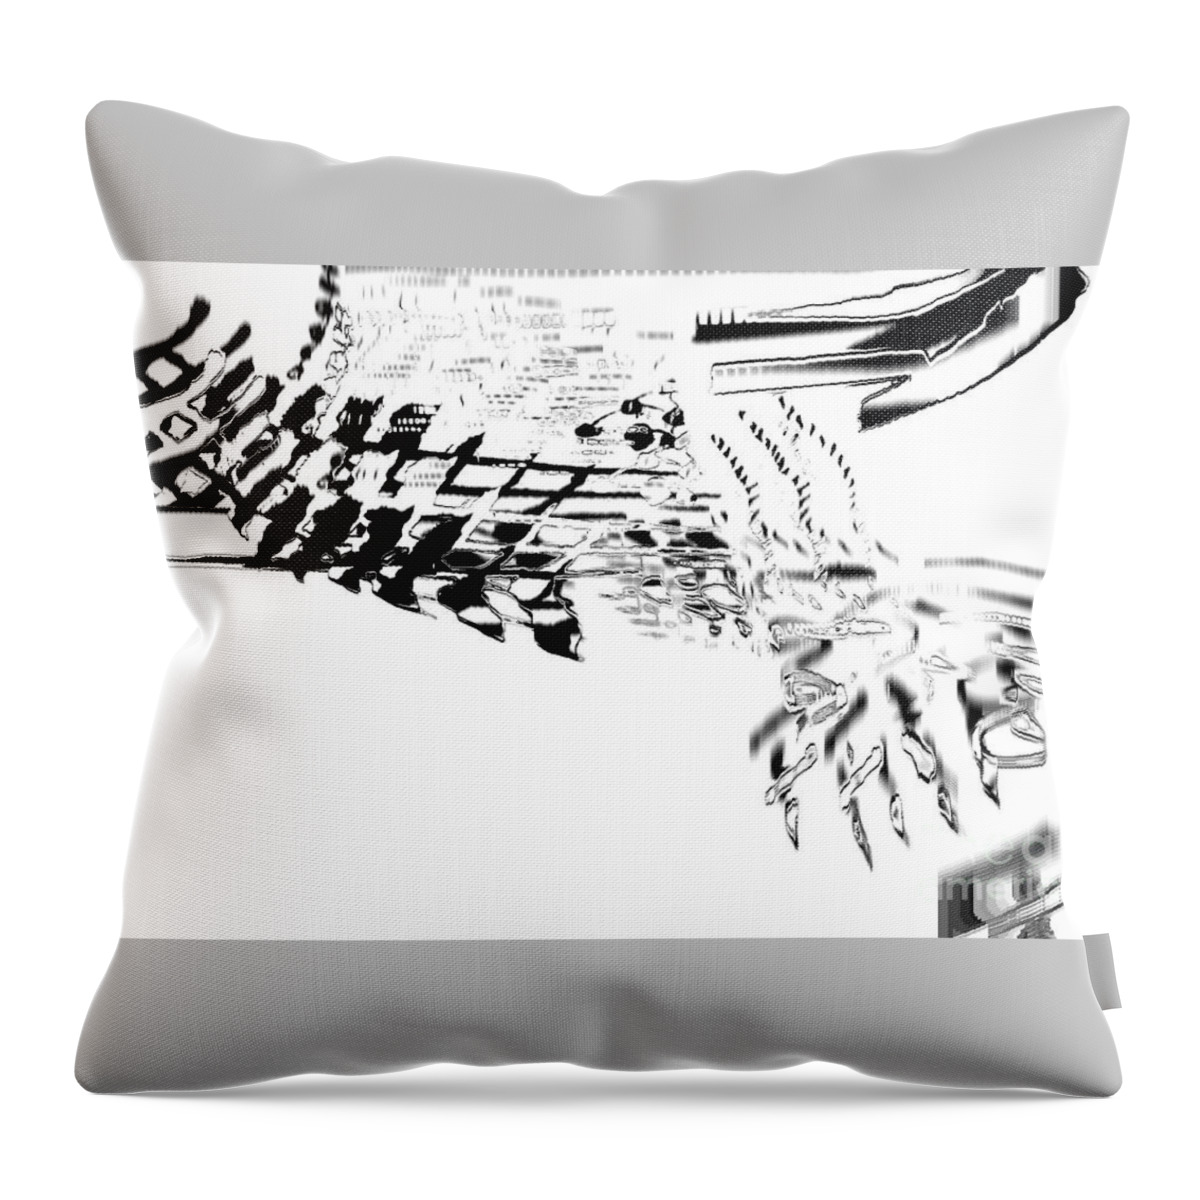 Abstract Artwork Throw Pillow featuring the digital art But I Have Not Said Anything by Jeremiah Ray